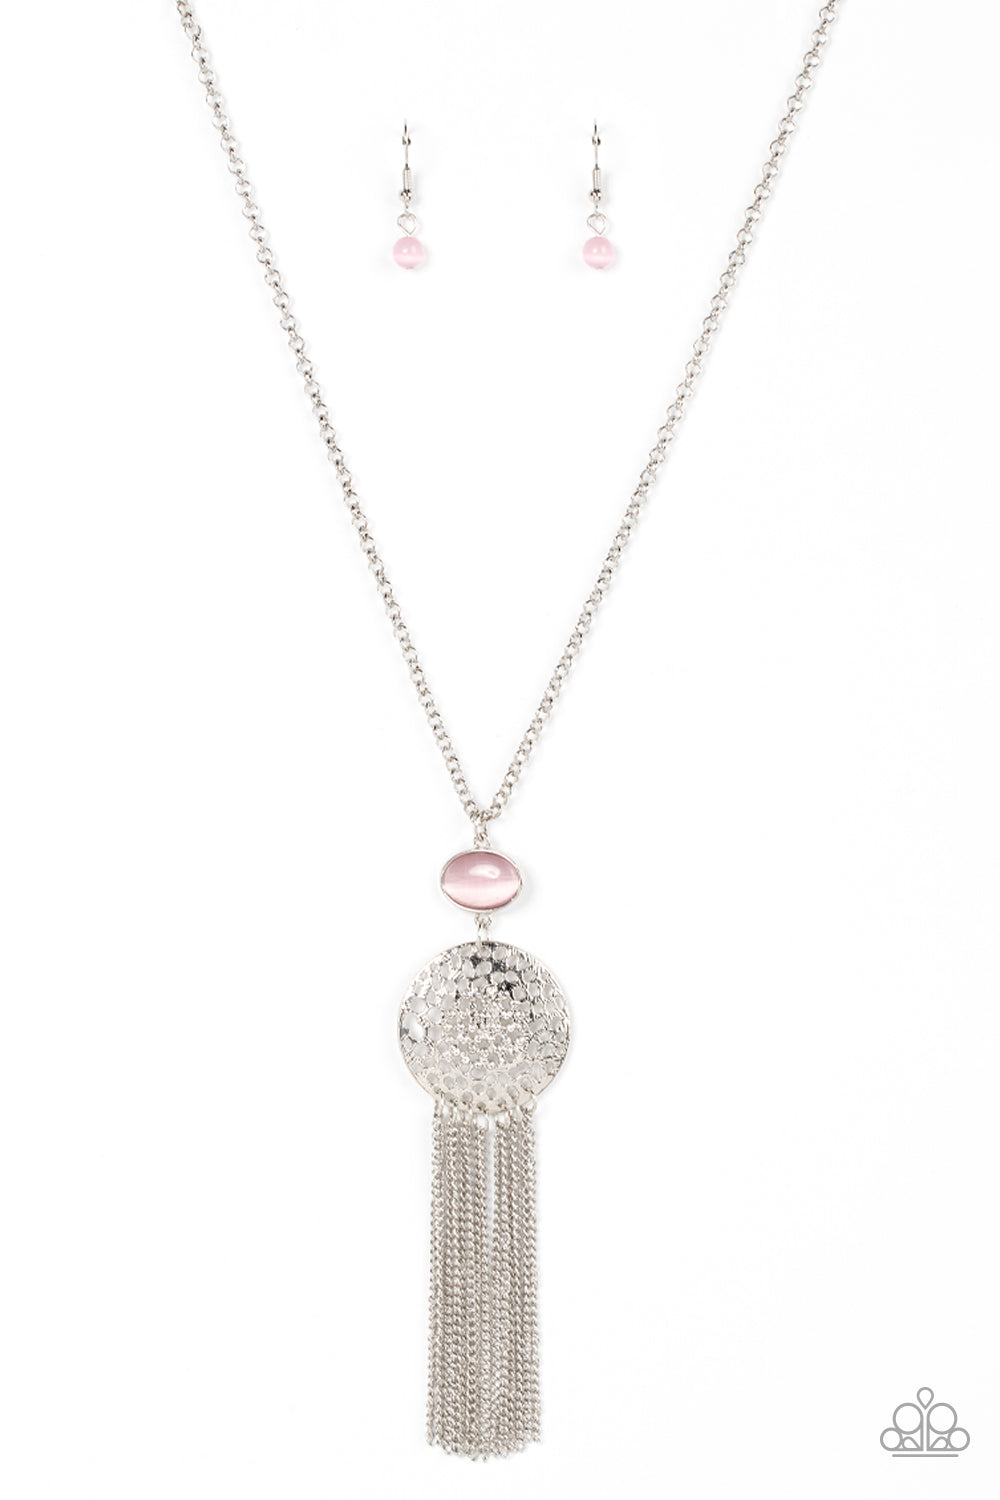 Paparazzi Necklaces - Everyday Excursionist - Pink